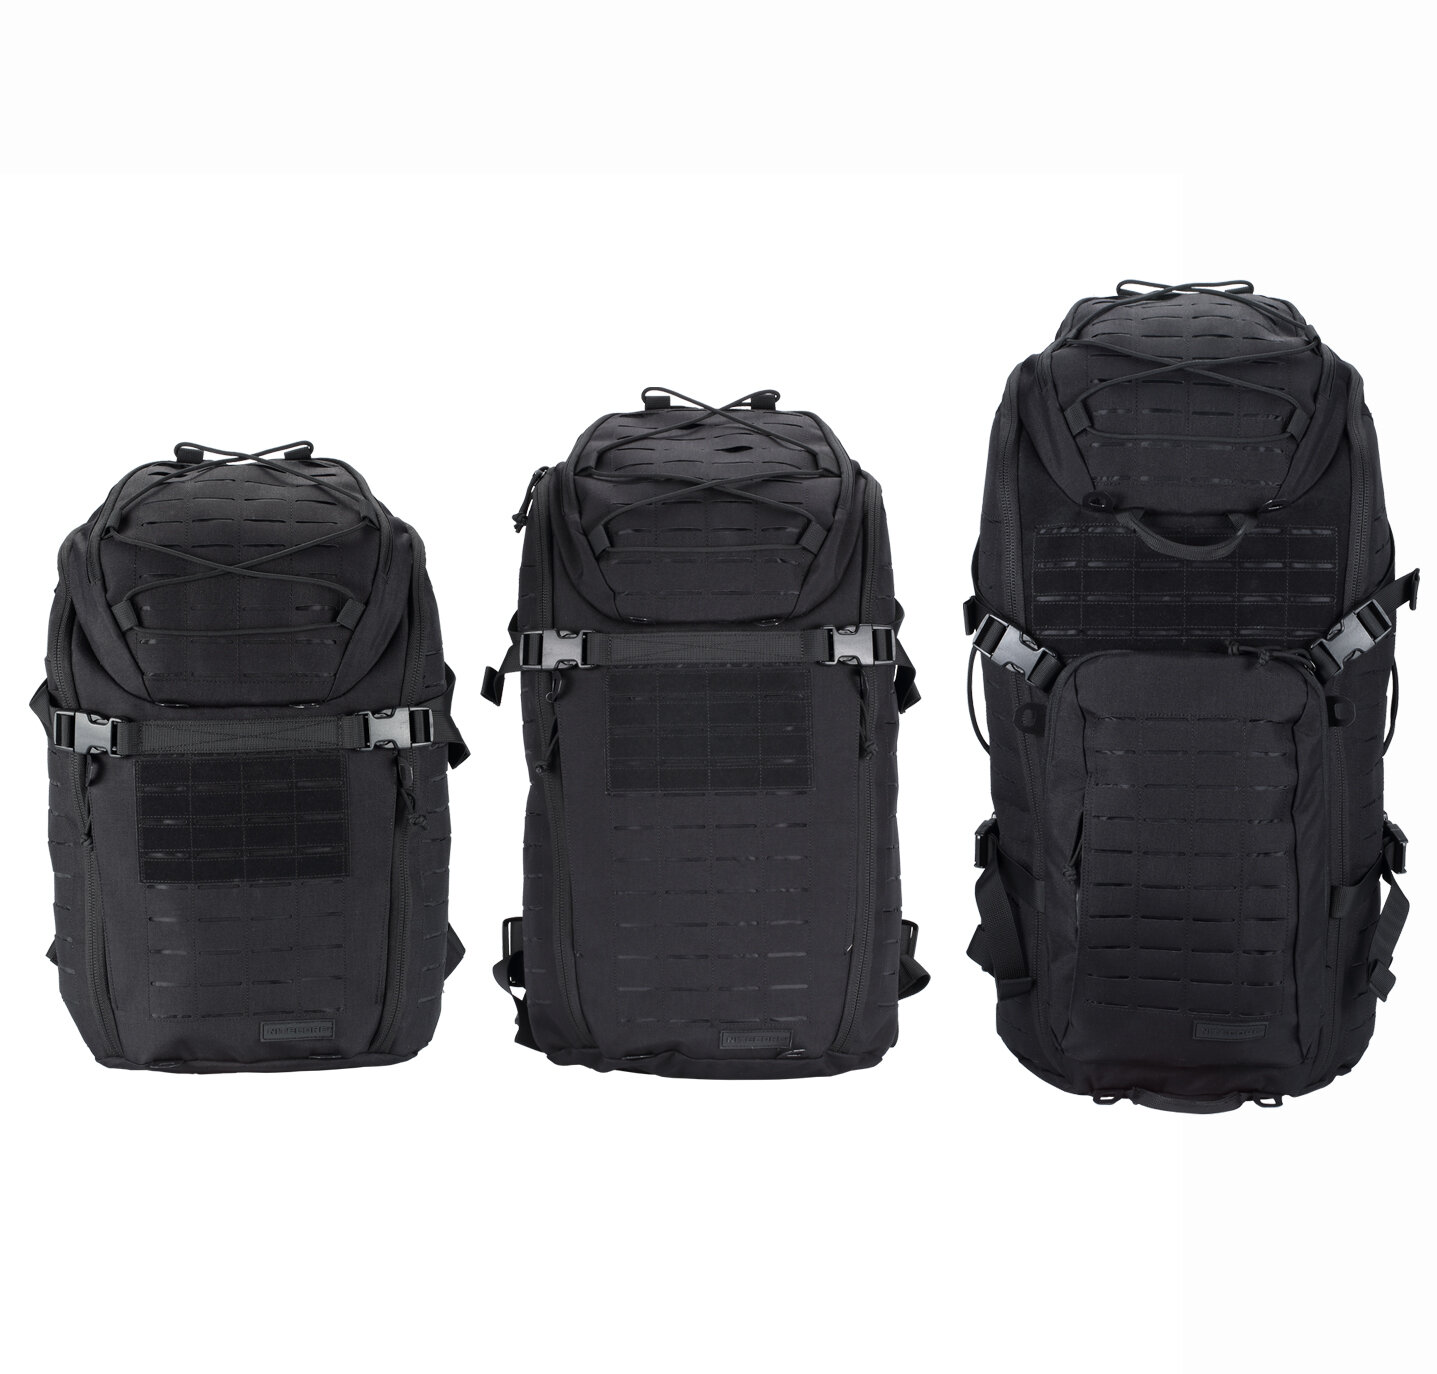 Nitecore MP20/MP25/MP30 20L/25L/30L Modular Tactical Backpack Outdoor Waterproof Expandable Travel Hunting Camping Bag